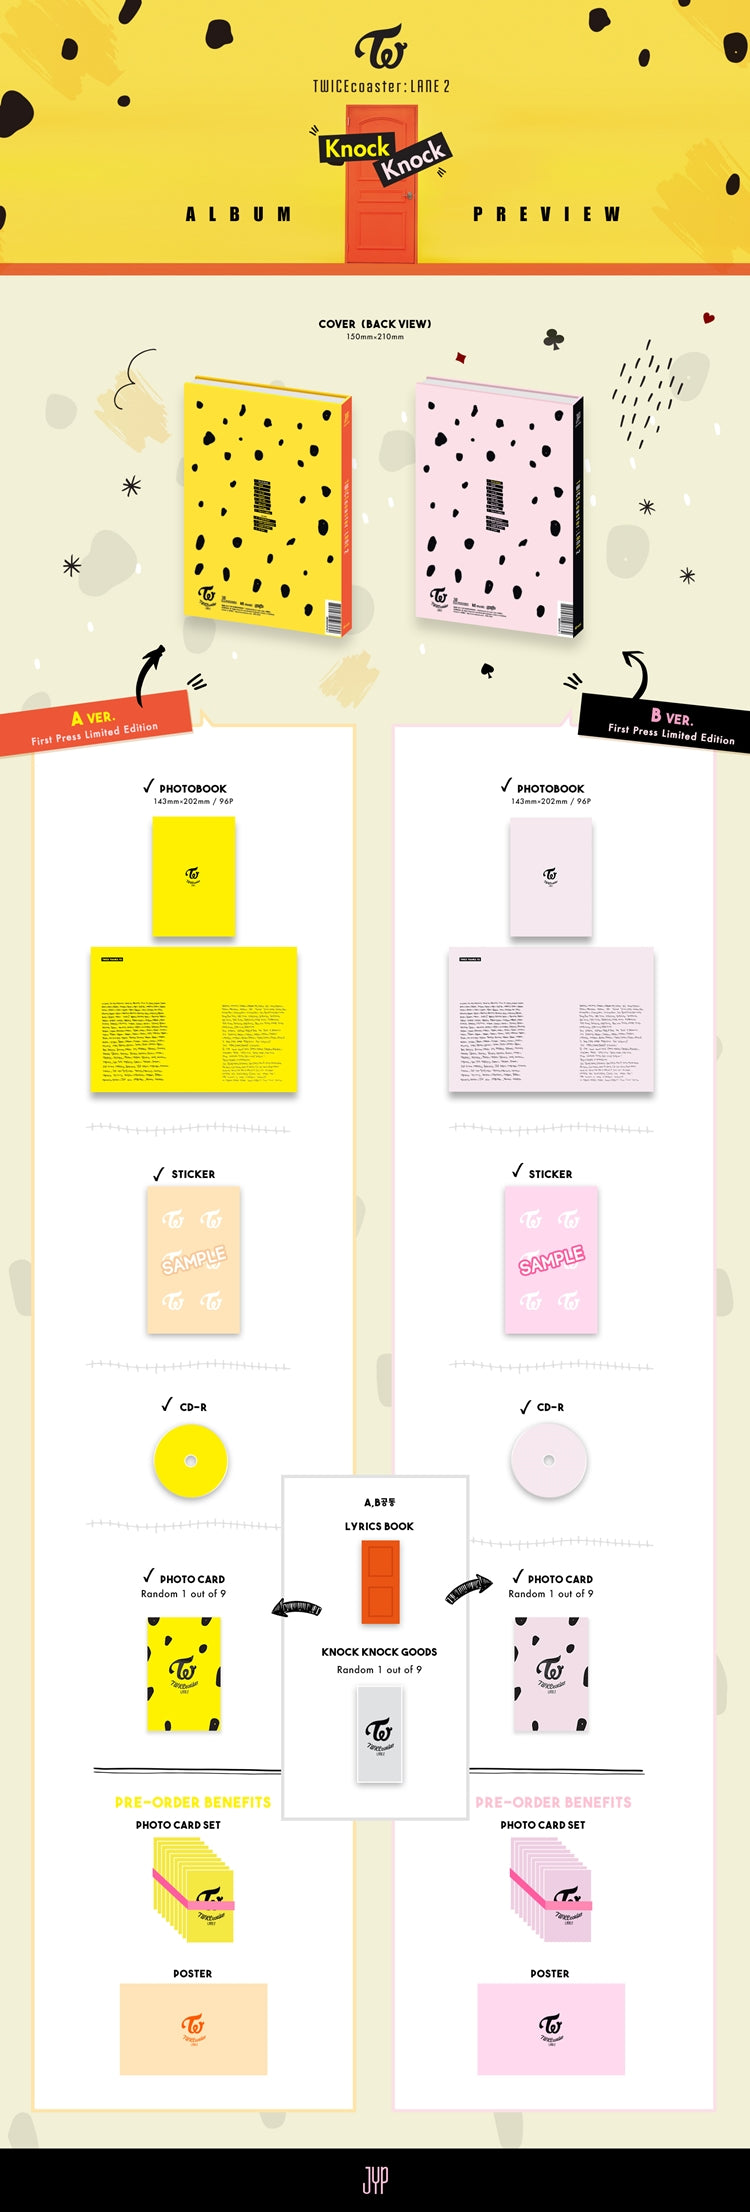 1 CD
1 Photo Book (96 pages)
1 Sticker
1 Photo Card (random out of 9 types)
1 Lyrics Book
1 Knock Knock Goods (random out ...